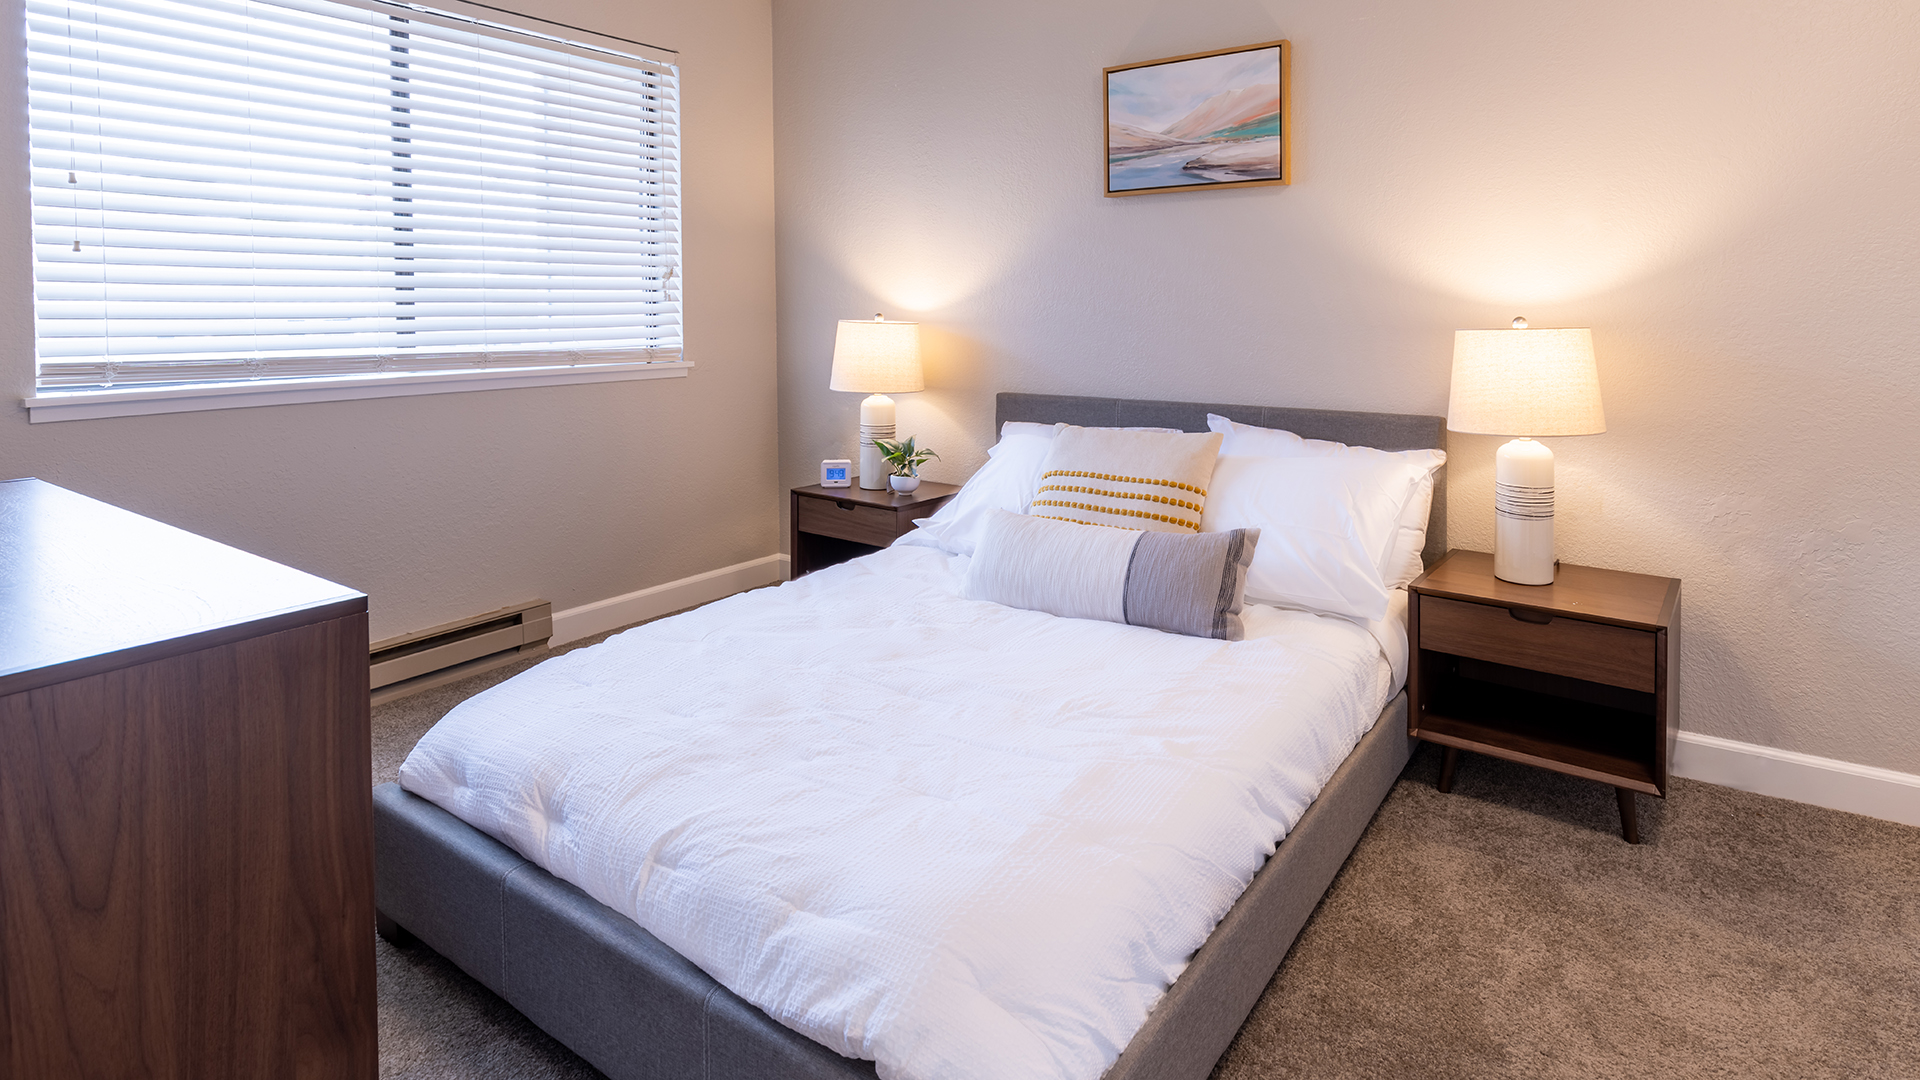 Cozy senior apartment at Holiday Virginian with window and carpeting in a furnished bedroom.